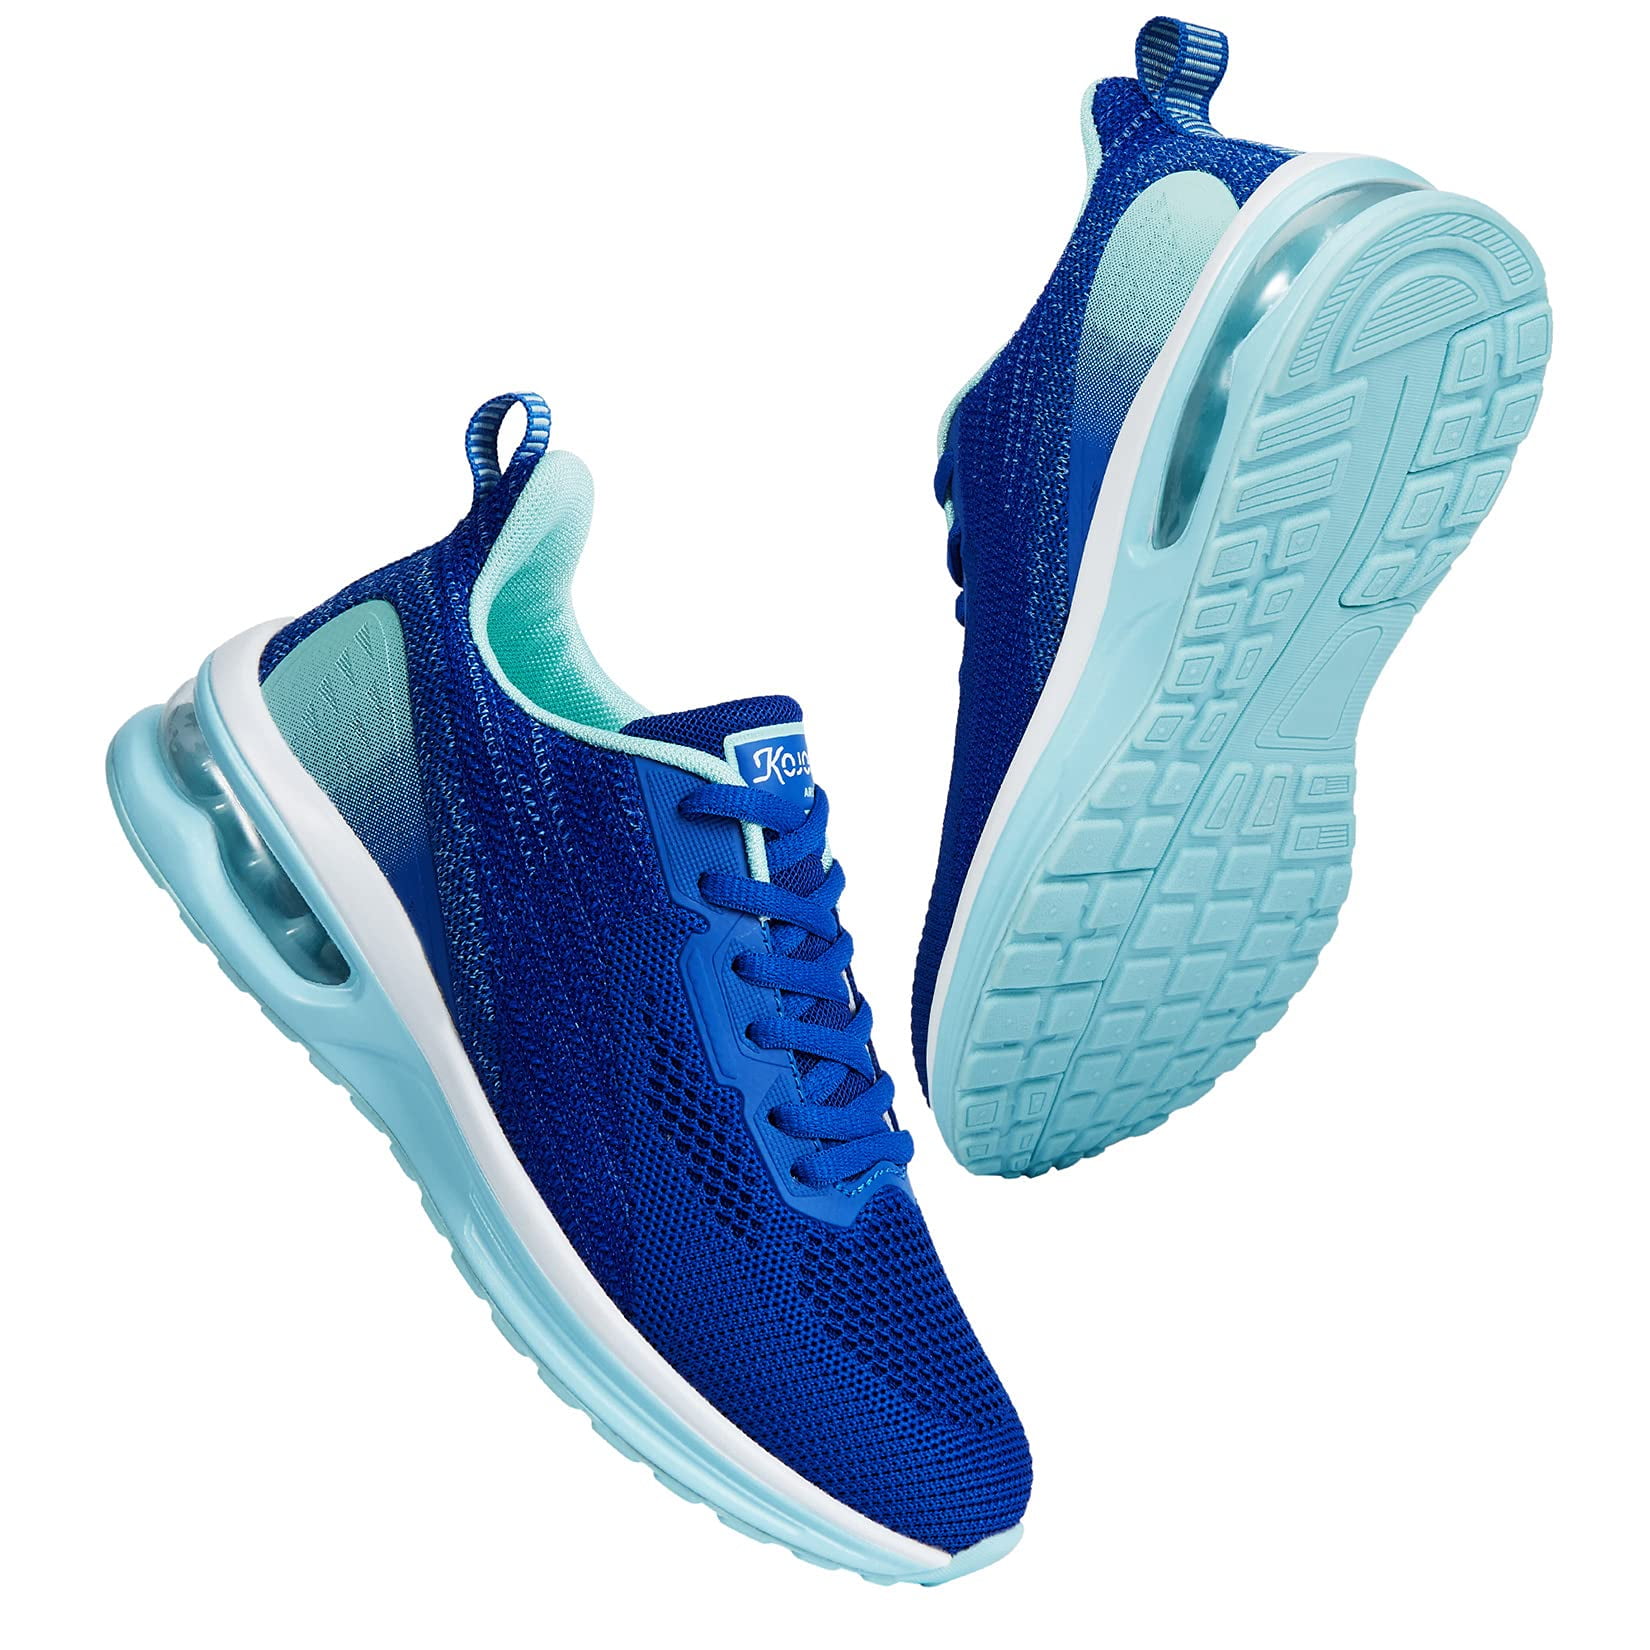 Women Running Shoes Air Cushion Ladies Casual Sneakers Free